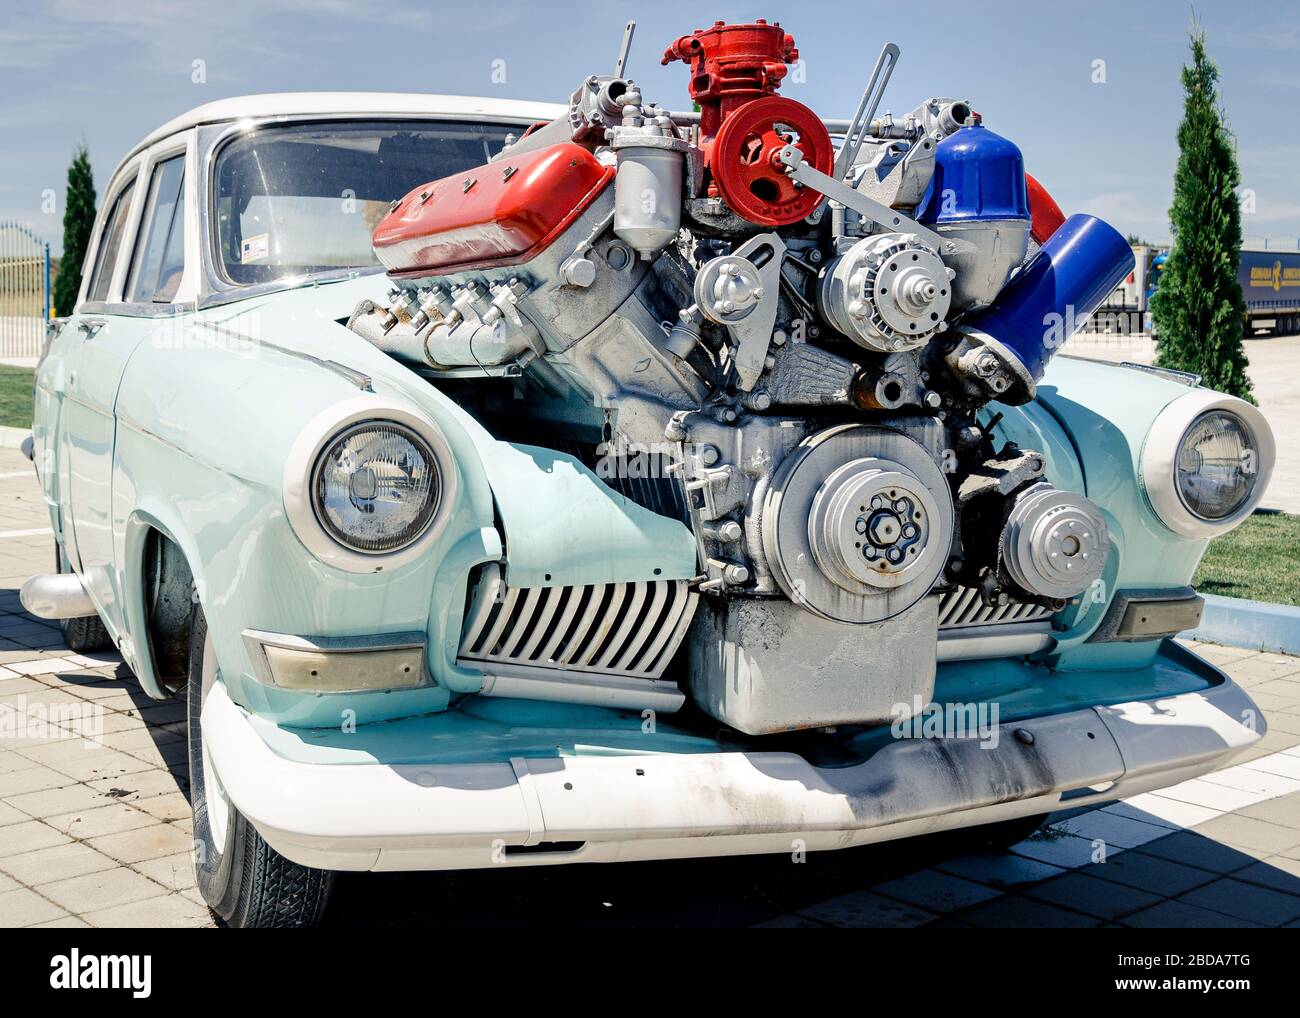 Medium shot of old car with oversized mounted engine powerful concept or over enthusiastic conversion concept Stock Photo